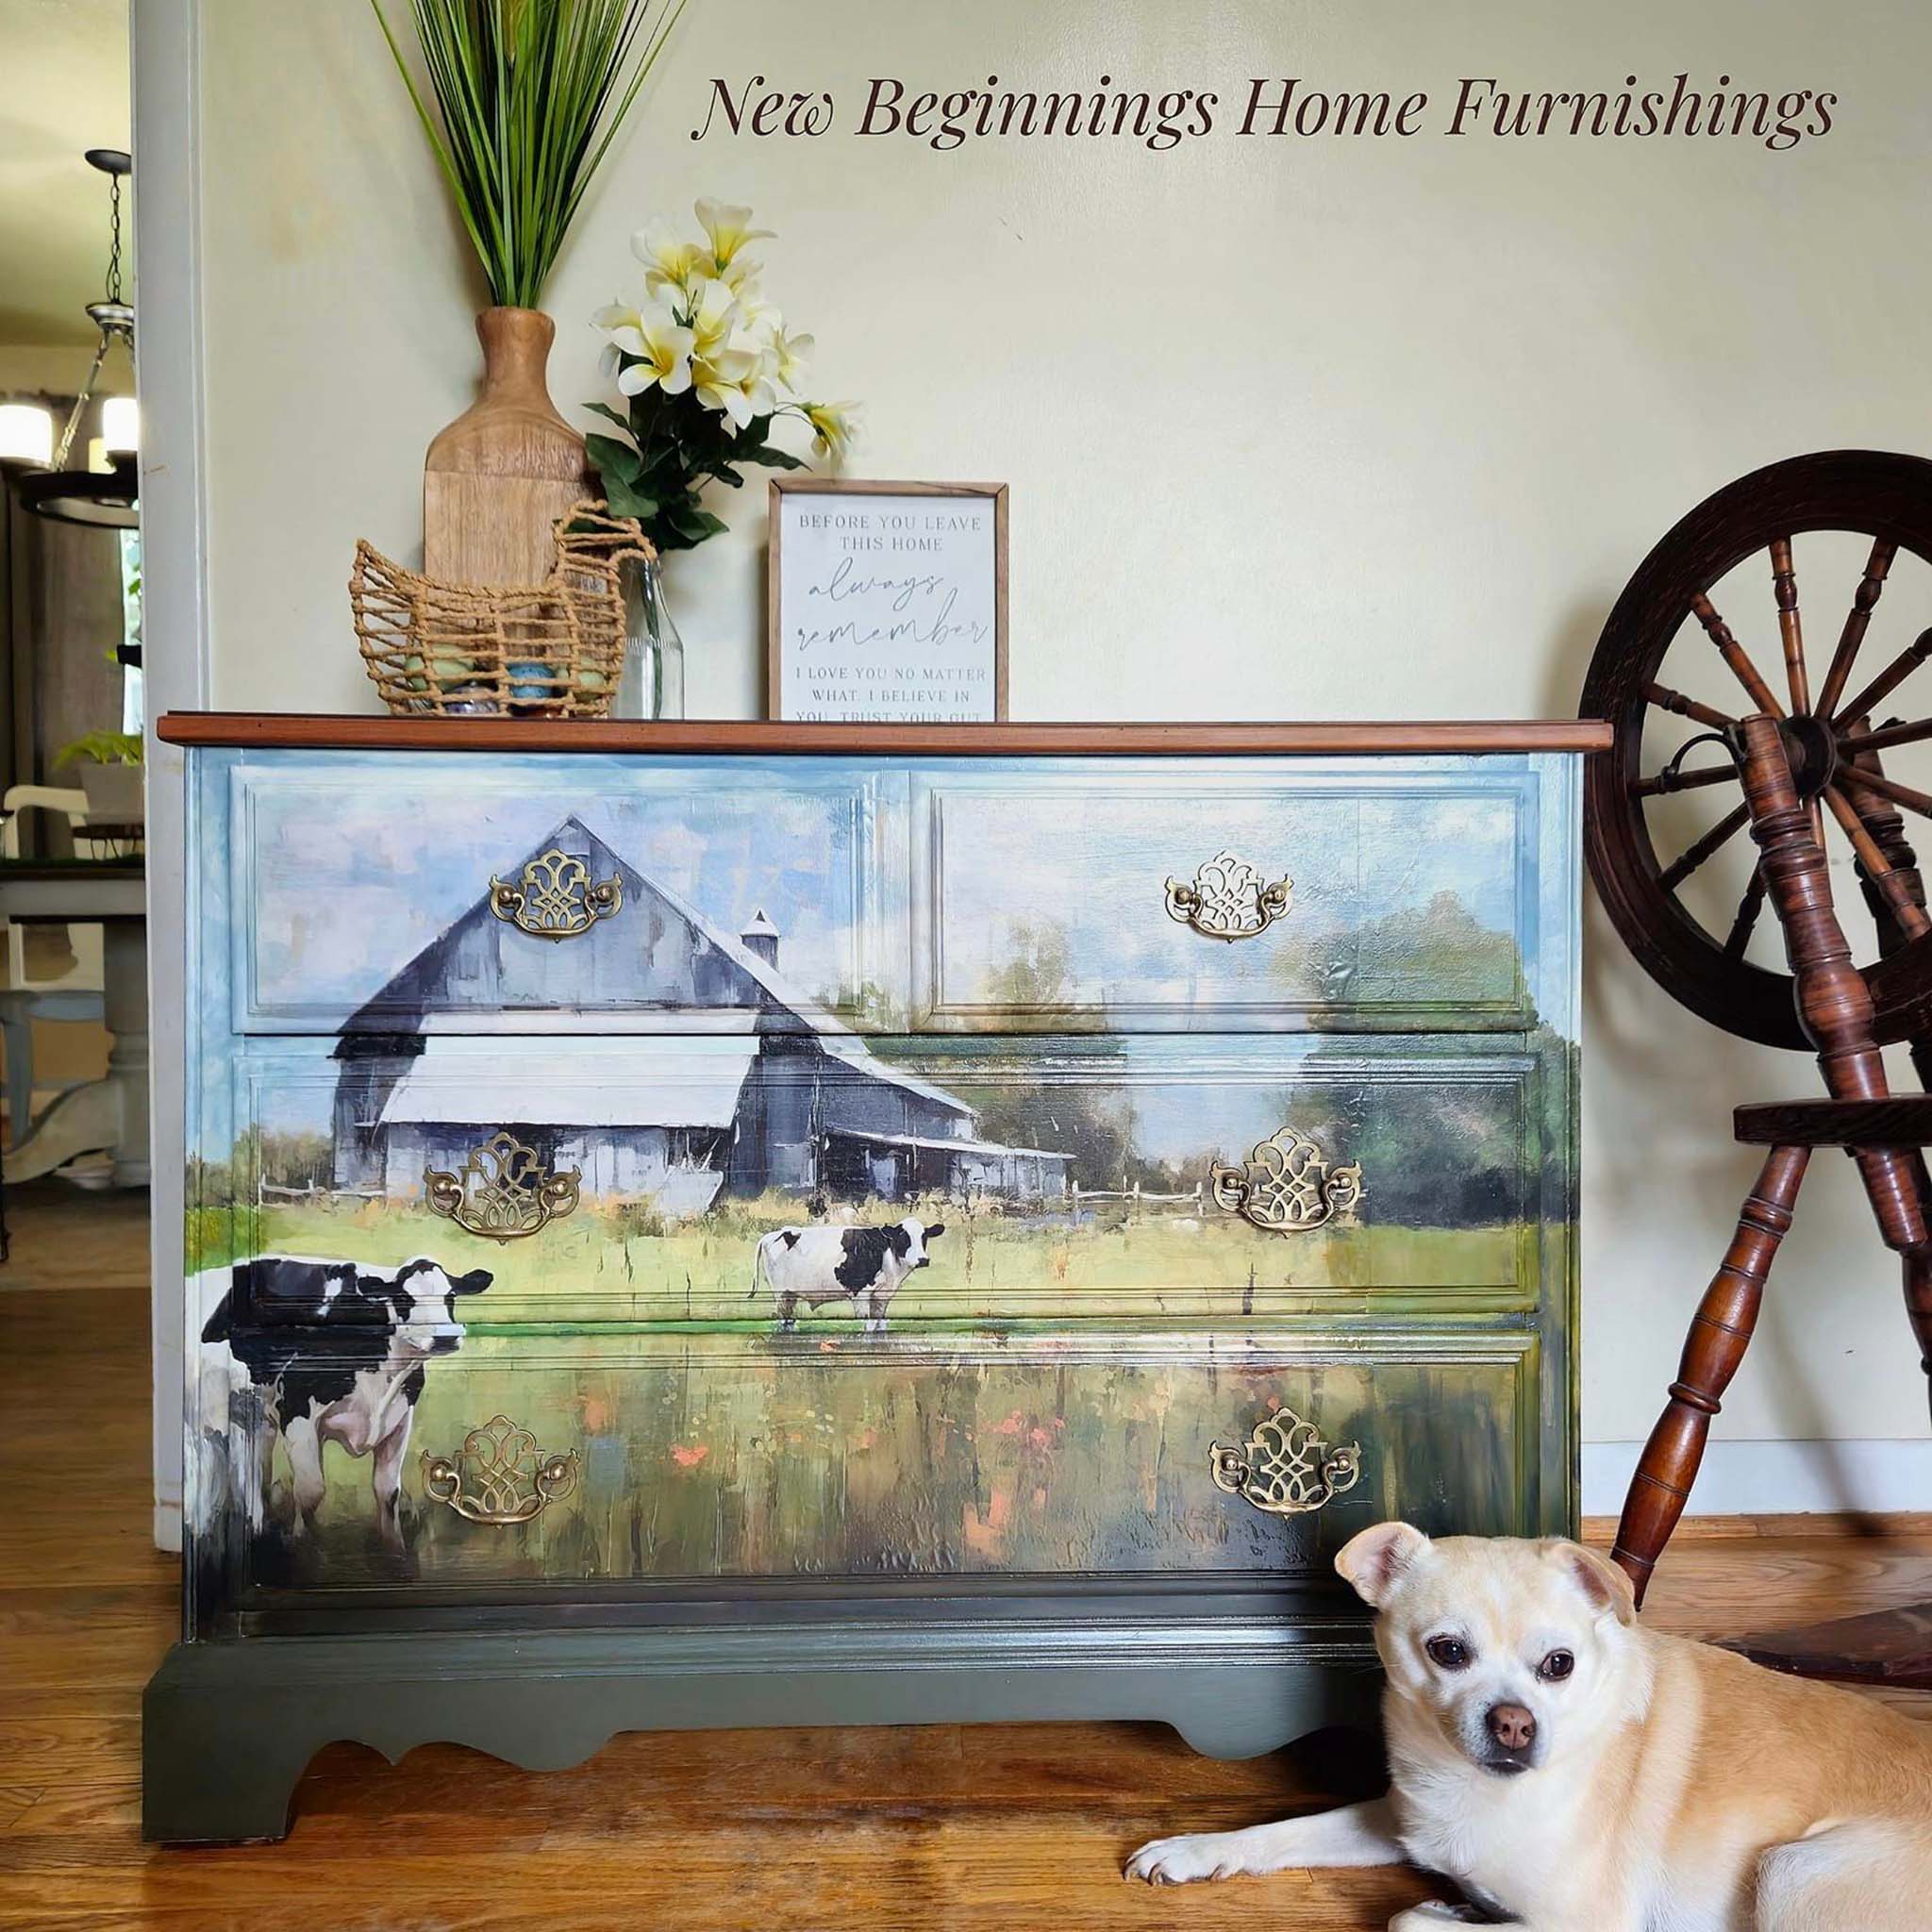 A vintage 4-drawer dresser refurbished by New Beginnings Home Furnishings features Whimsykel's Heartland tissue paper on the front.